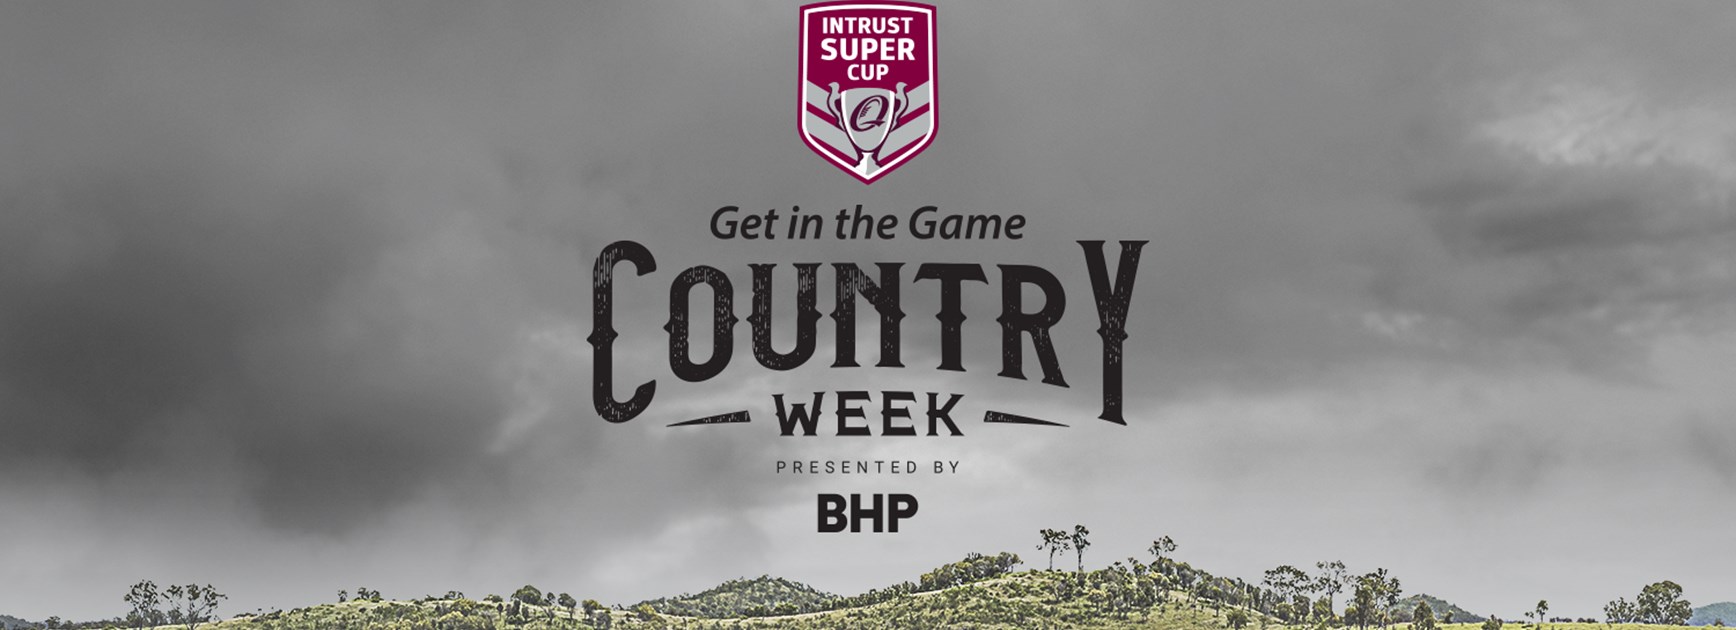 Country Week locations announced